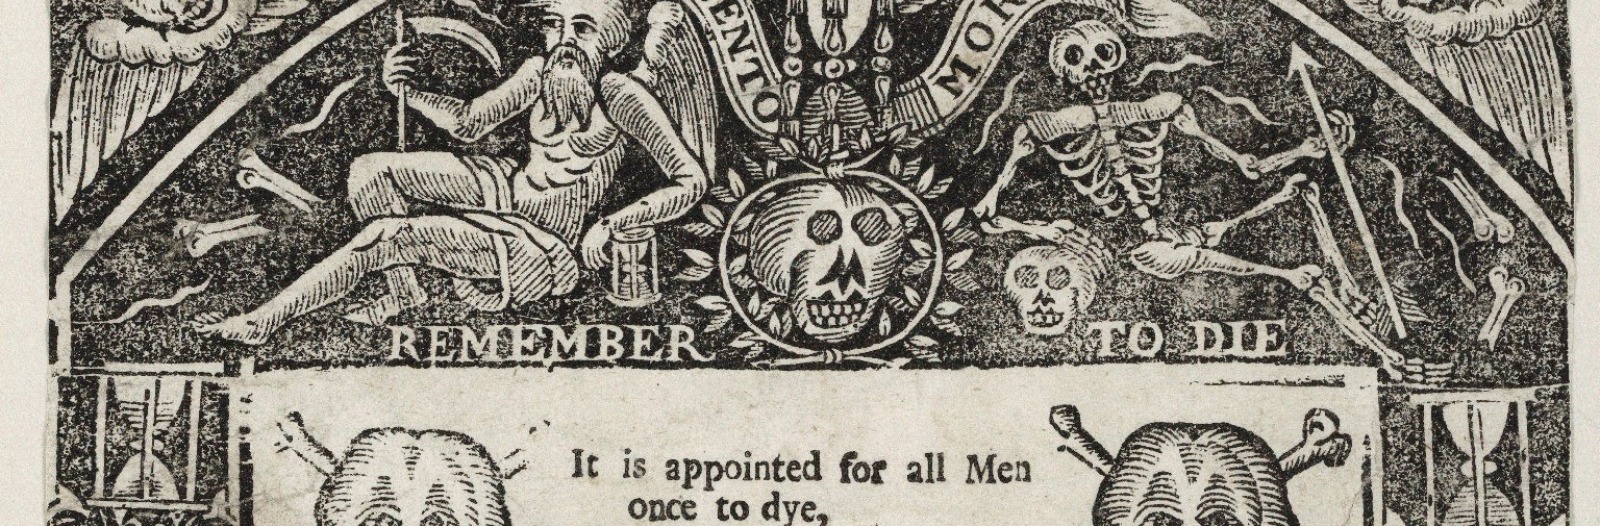 Memento Mori woodcut - Remember to die. It is appointed for all men once to dye therefore think upon eternity ...